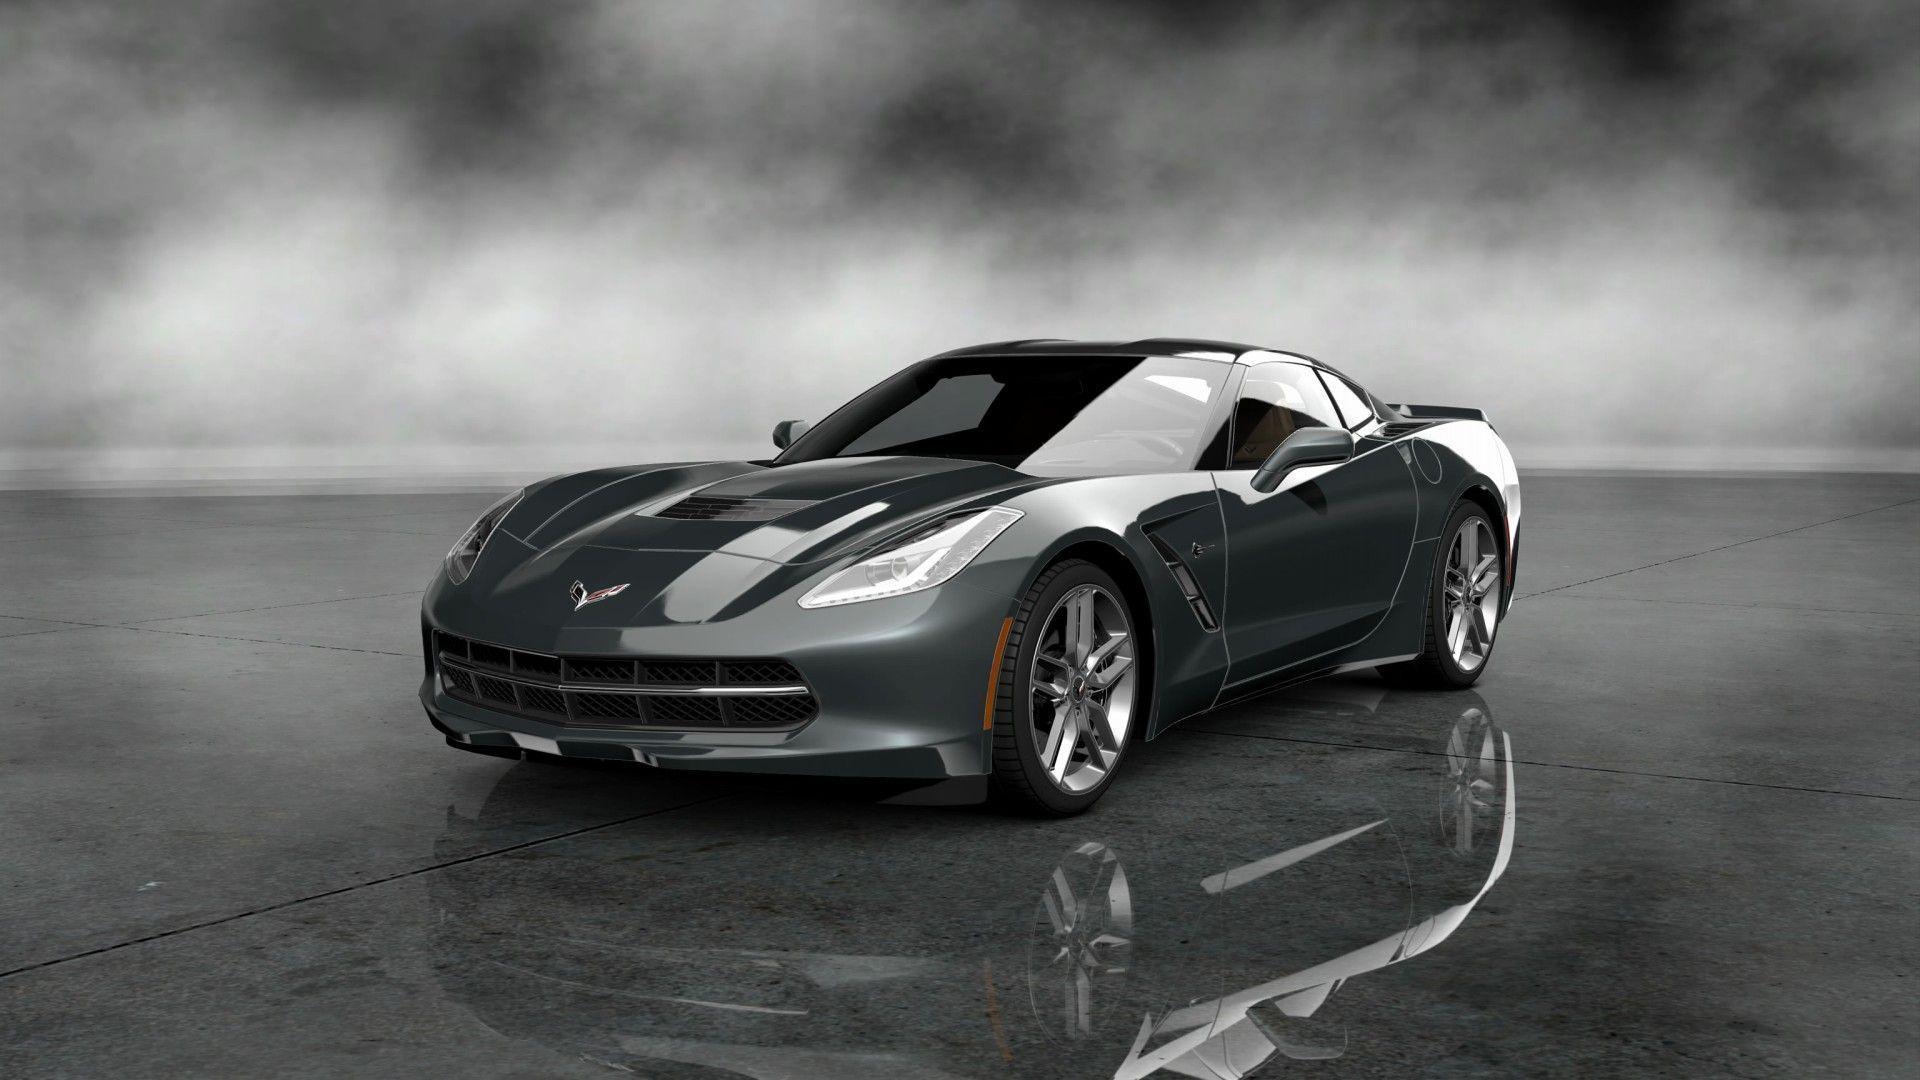 Amazing Full HD Chevrolet Corvette Picture & Background Collection